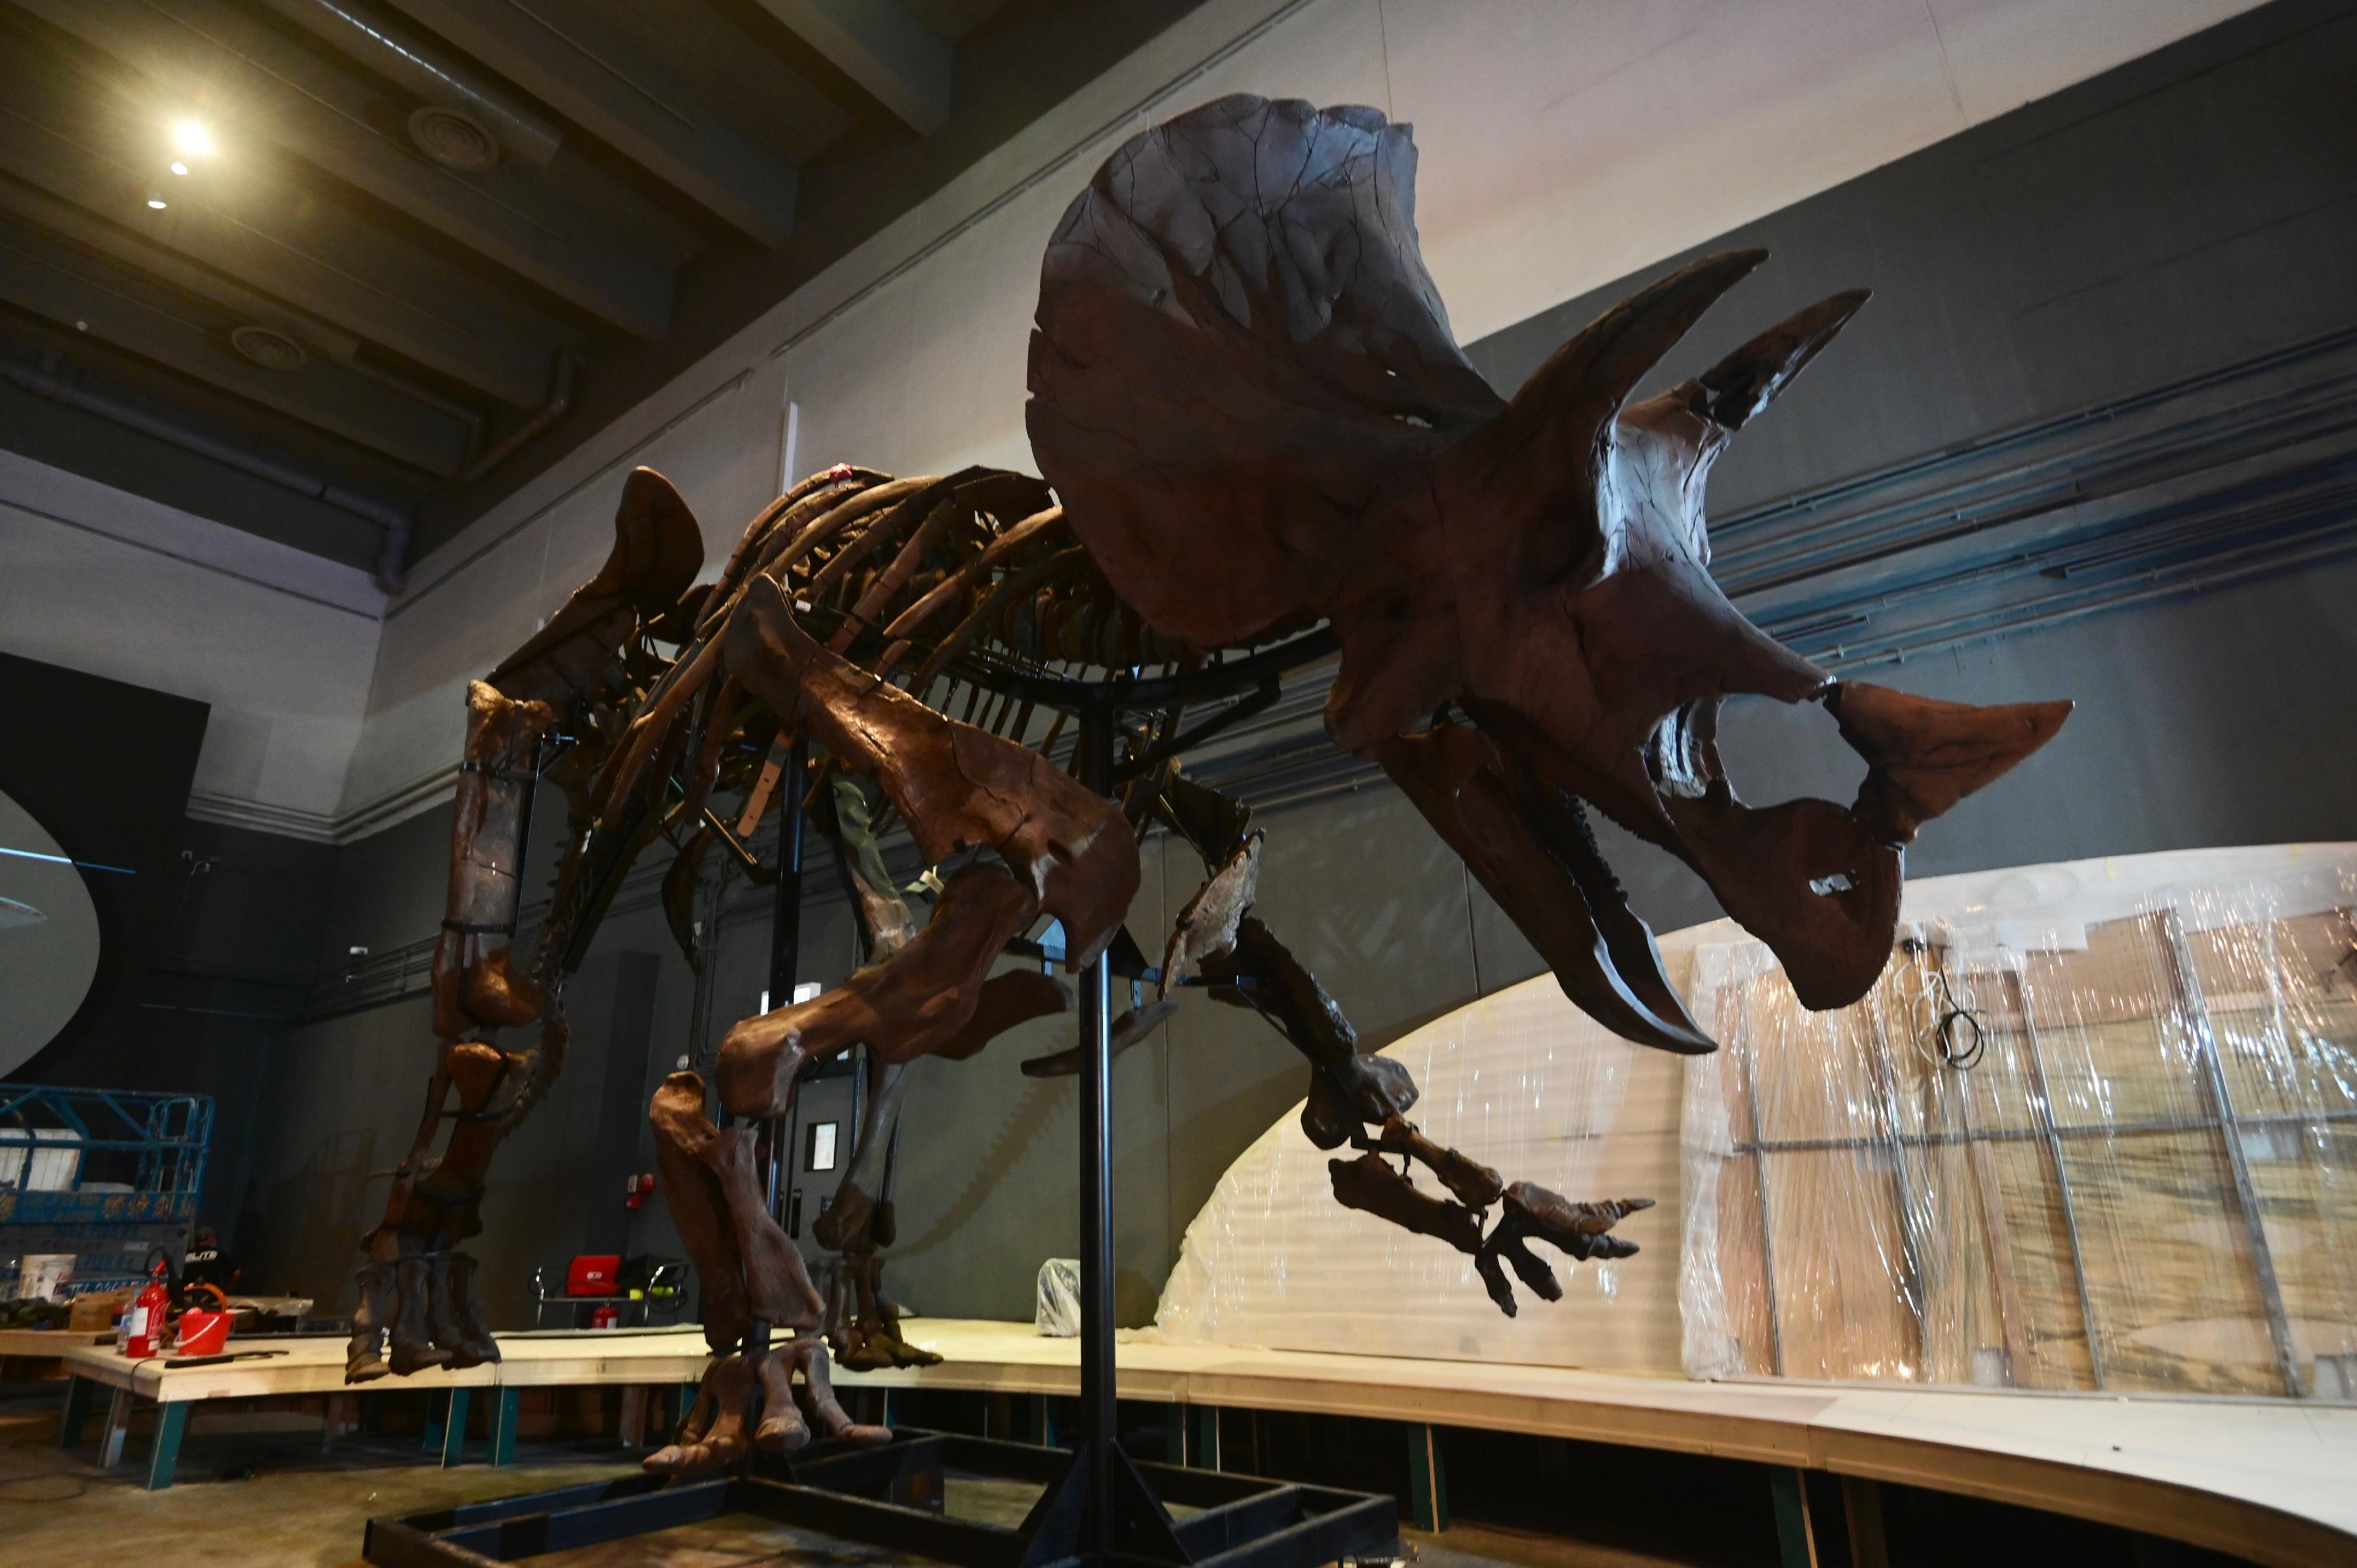 The Hong Kong Science Museum has started setting up exhibits for its large-scale dinosaur exhibition, "The Hong Kong Jockey Club Series: The Big Eight - Dinosaur Revelation", to be launched on July 8 (Friday). Picture shows the skeleton of a large Triceratops, specially installed for this exhibition, which will have its world premiere.